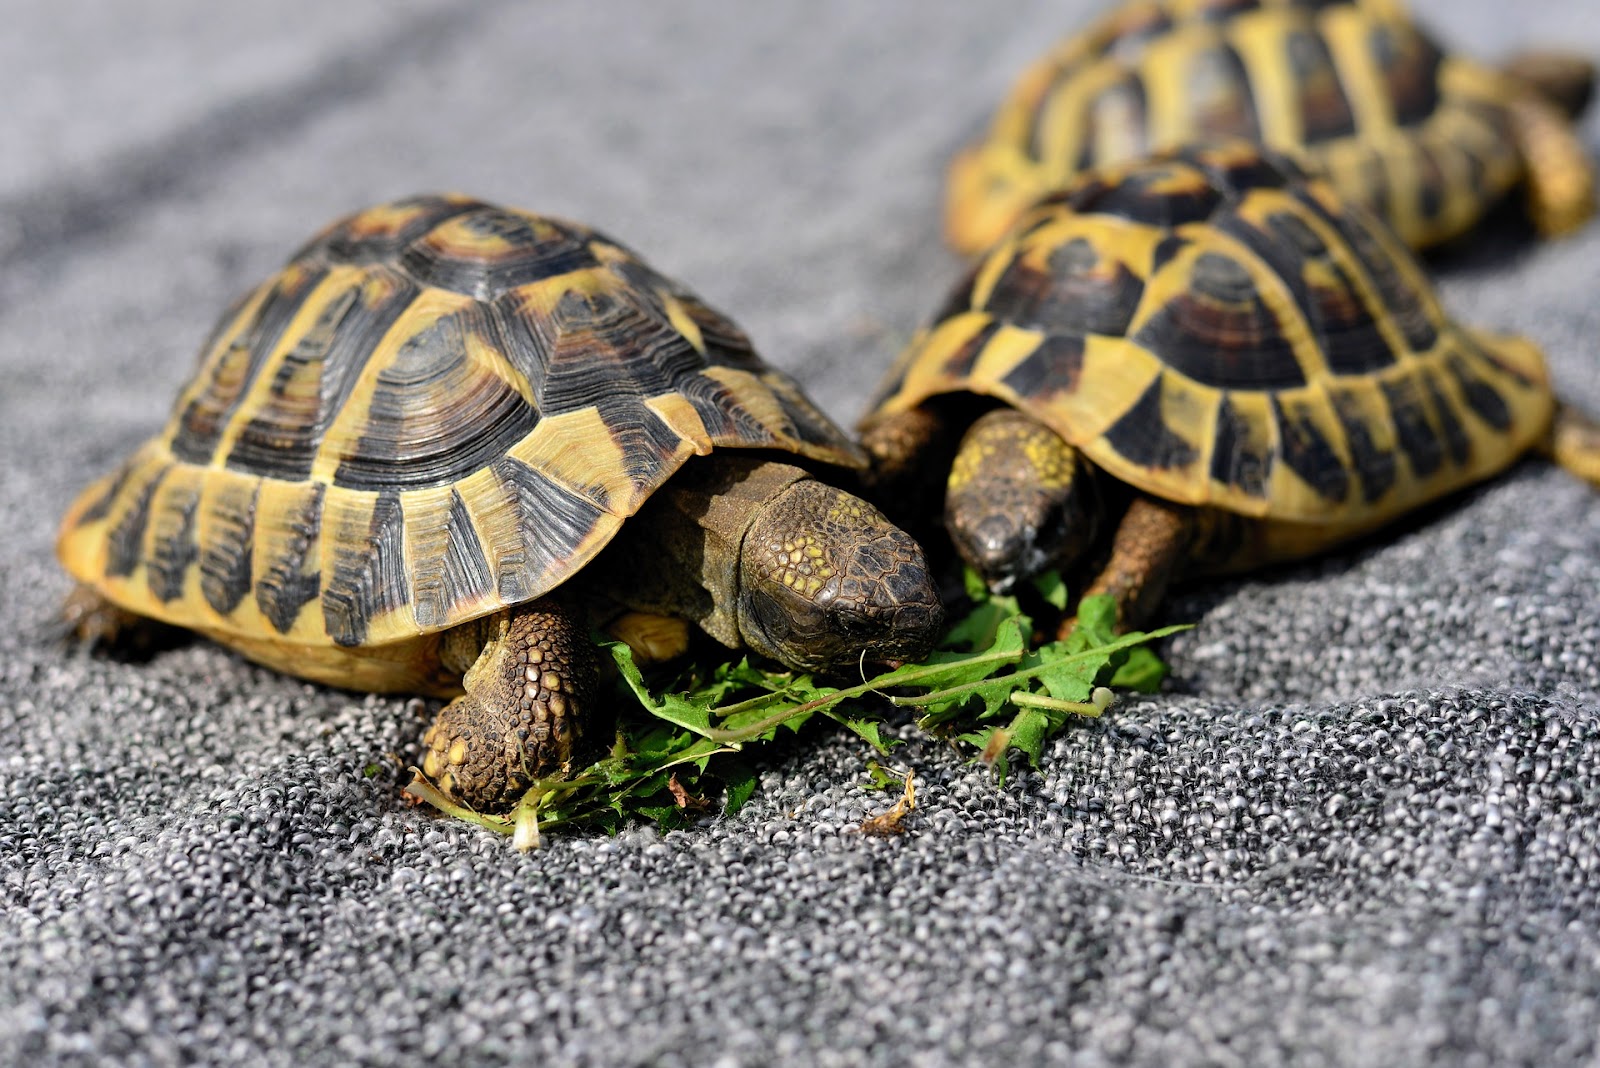 Young tortoises eating greens